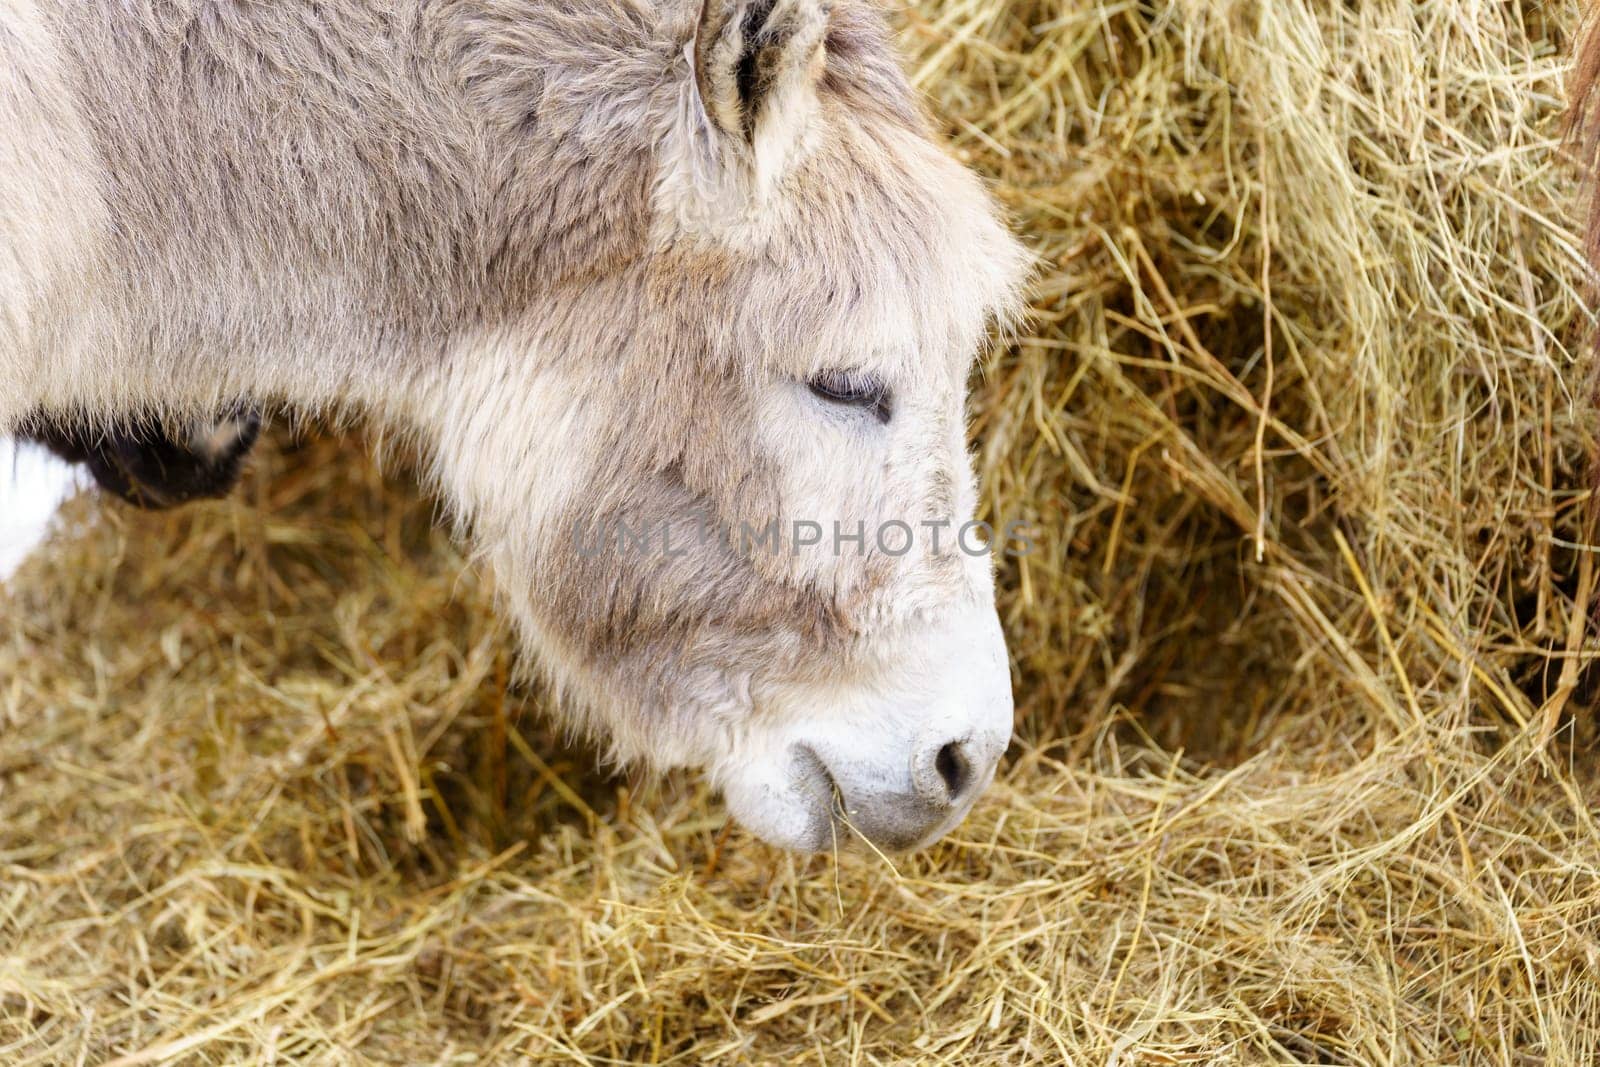 Donkey up close in a spacious pen, peacefully grazing, surrounded by wooden fencing. by darksoul72